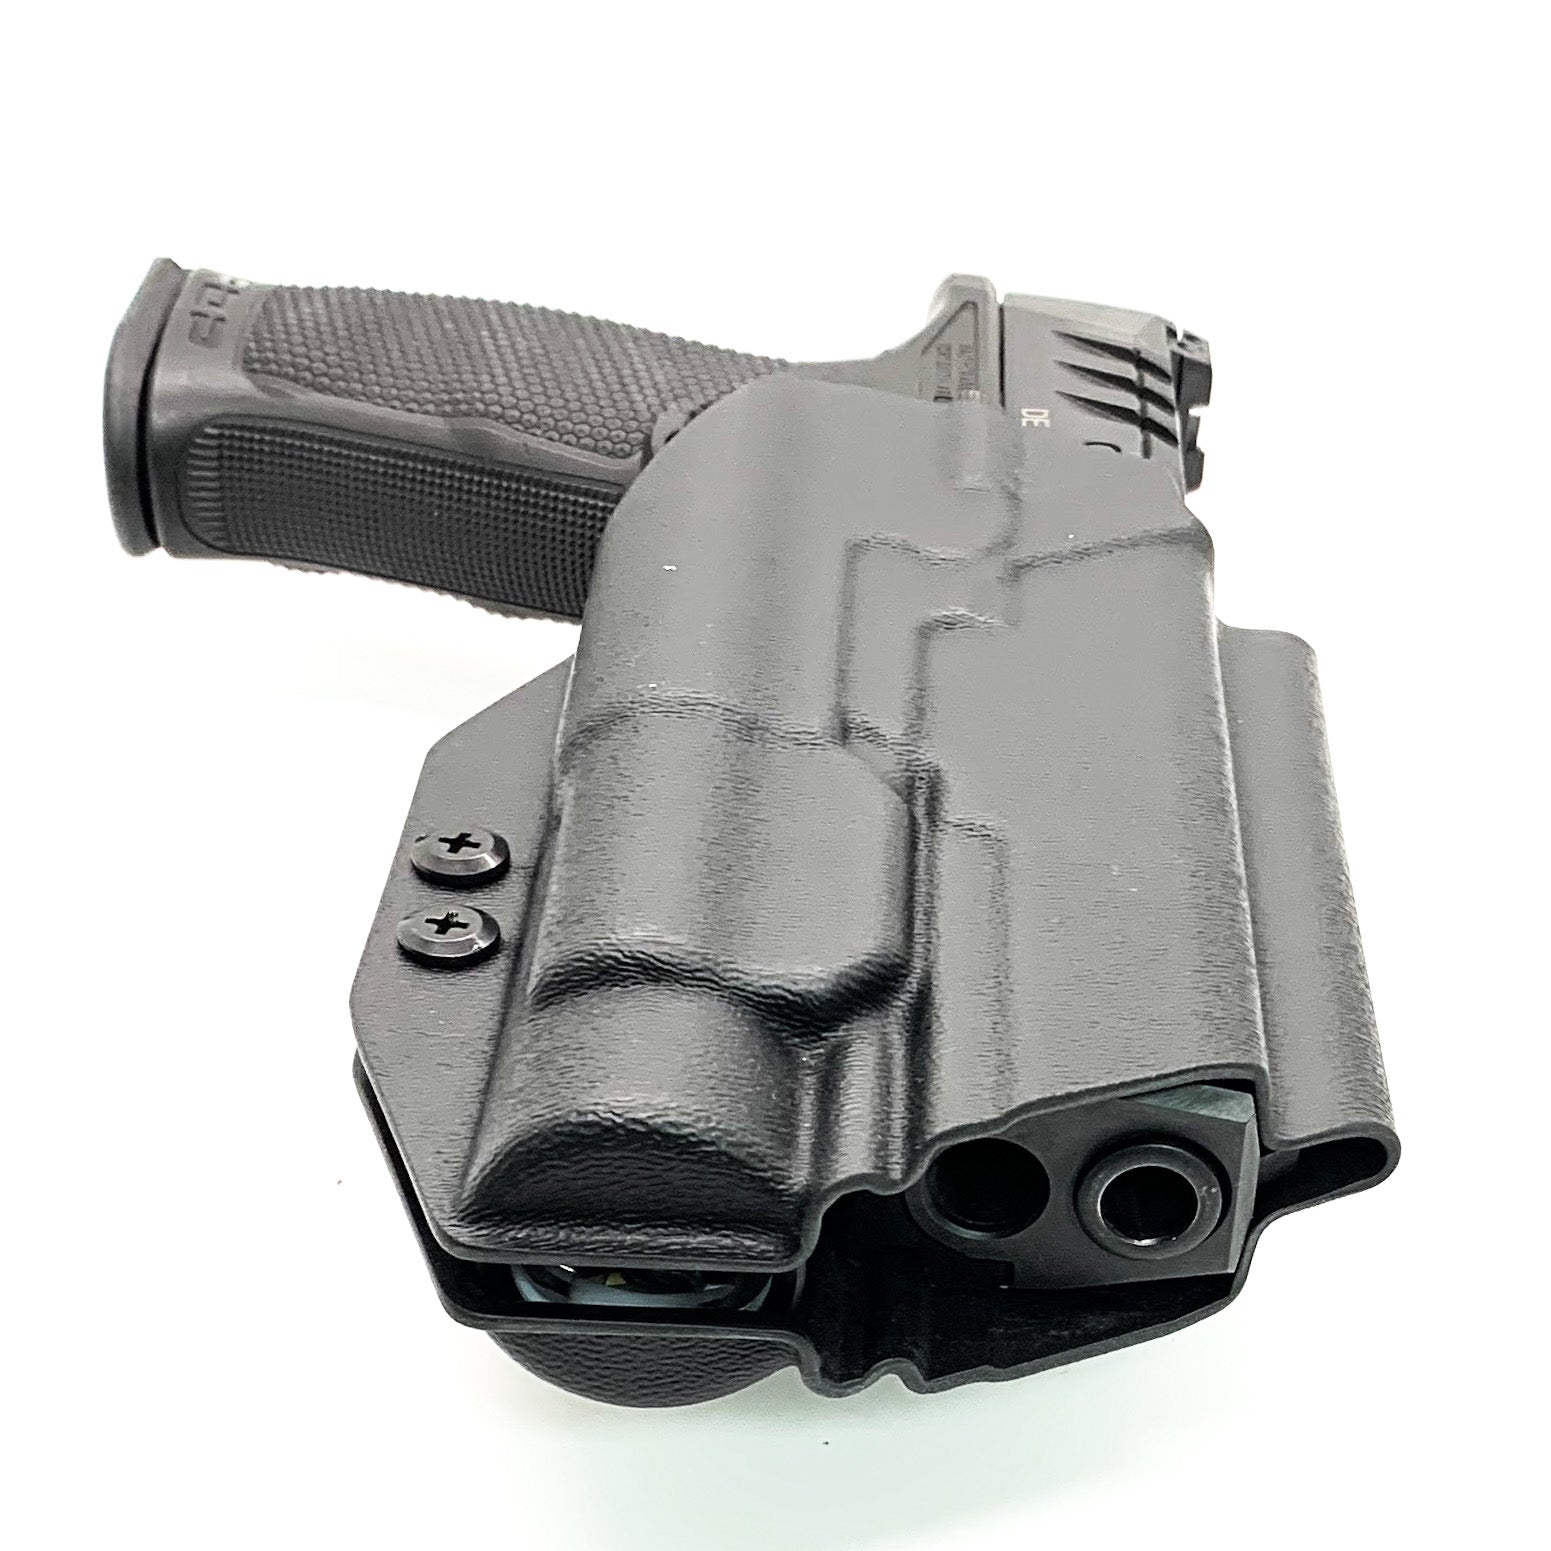 For the best Outside Waistband Taco Style Holster designed to fit the Walther PDP 4" or 4.5" Full-Size pistol with the Streamlight TLR-1 or TLR-1HL installed on the firearm, shop Four Brothers Holsters. Cut for red dot sight, full sweat guard, adjustable retention & open muzzle for threaded barrels & compensators. 